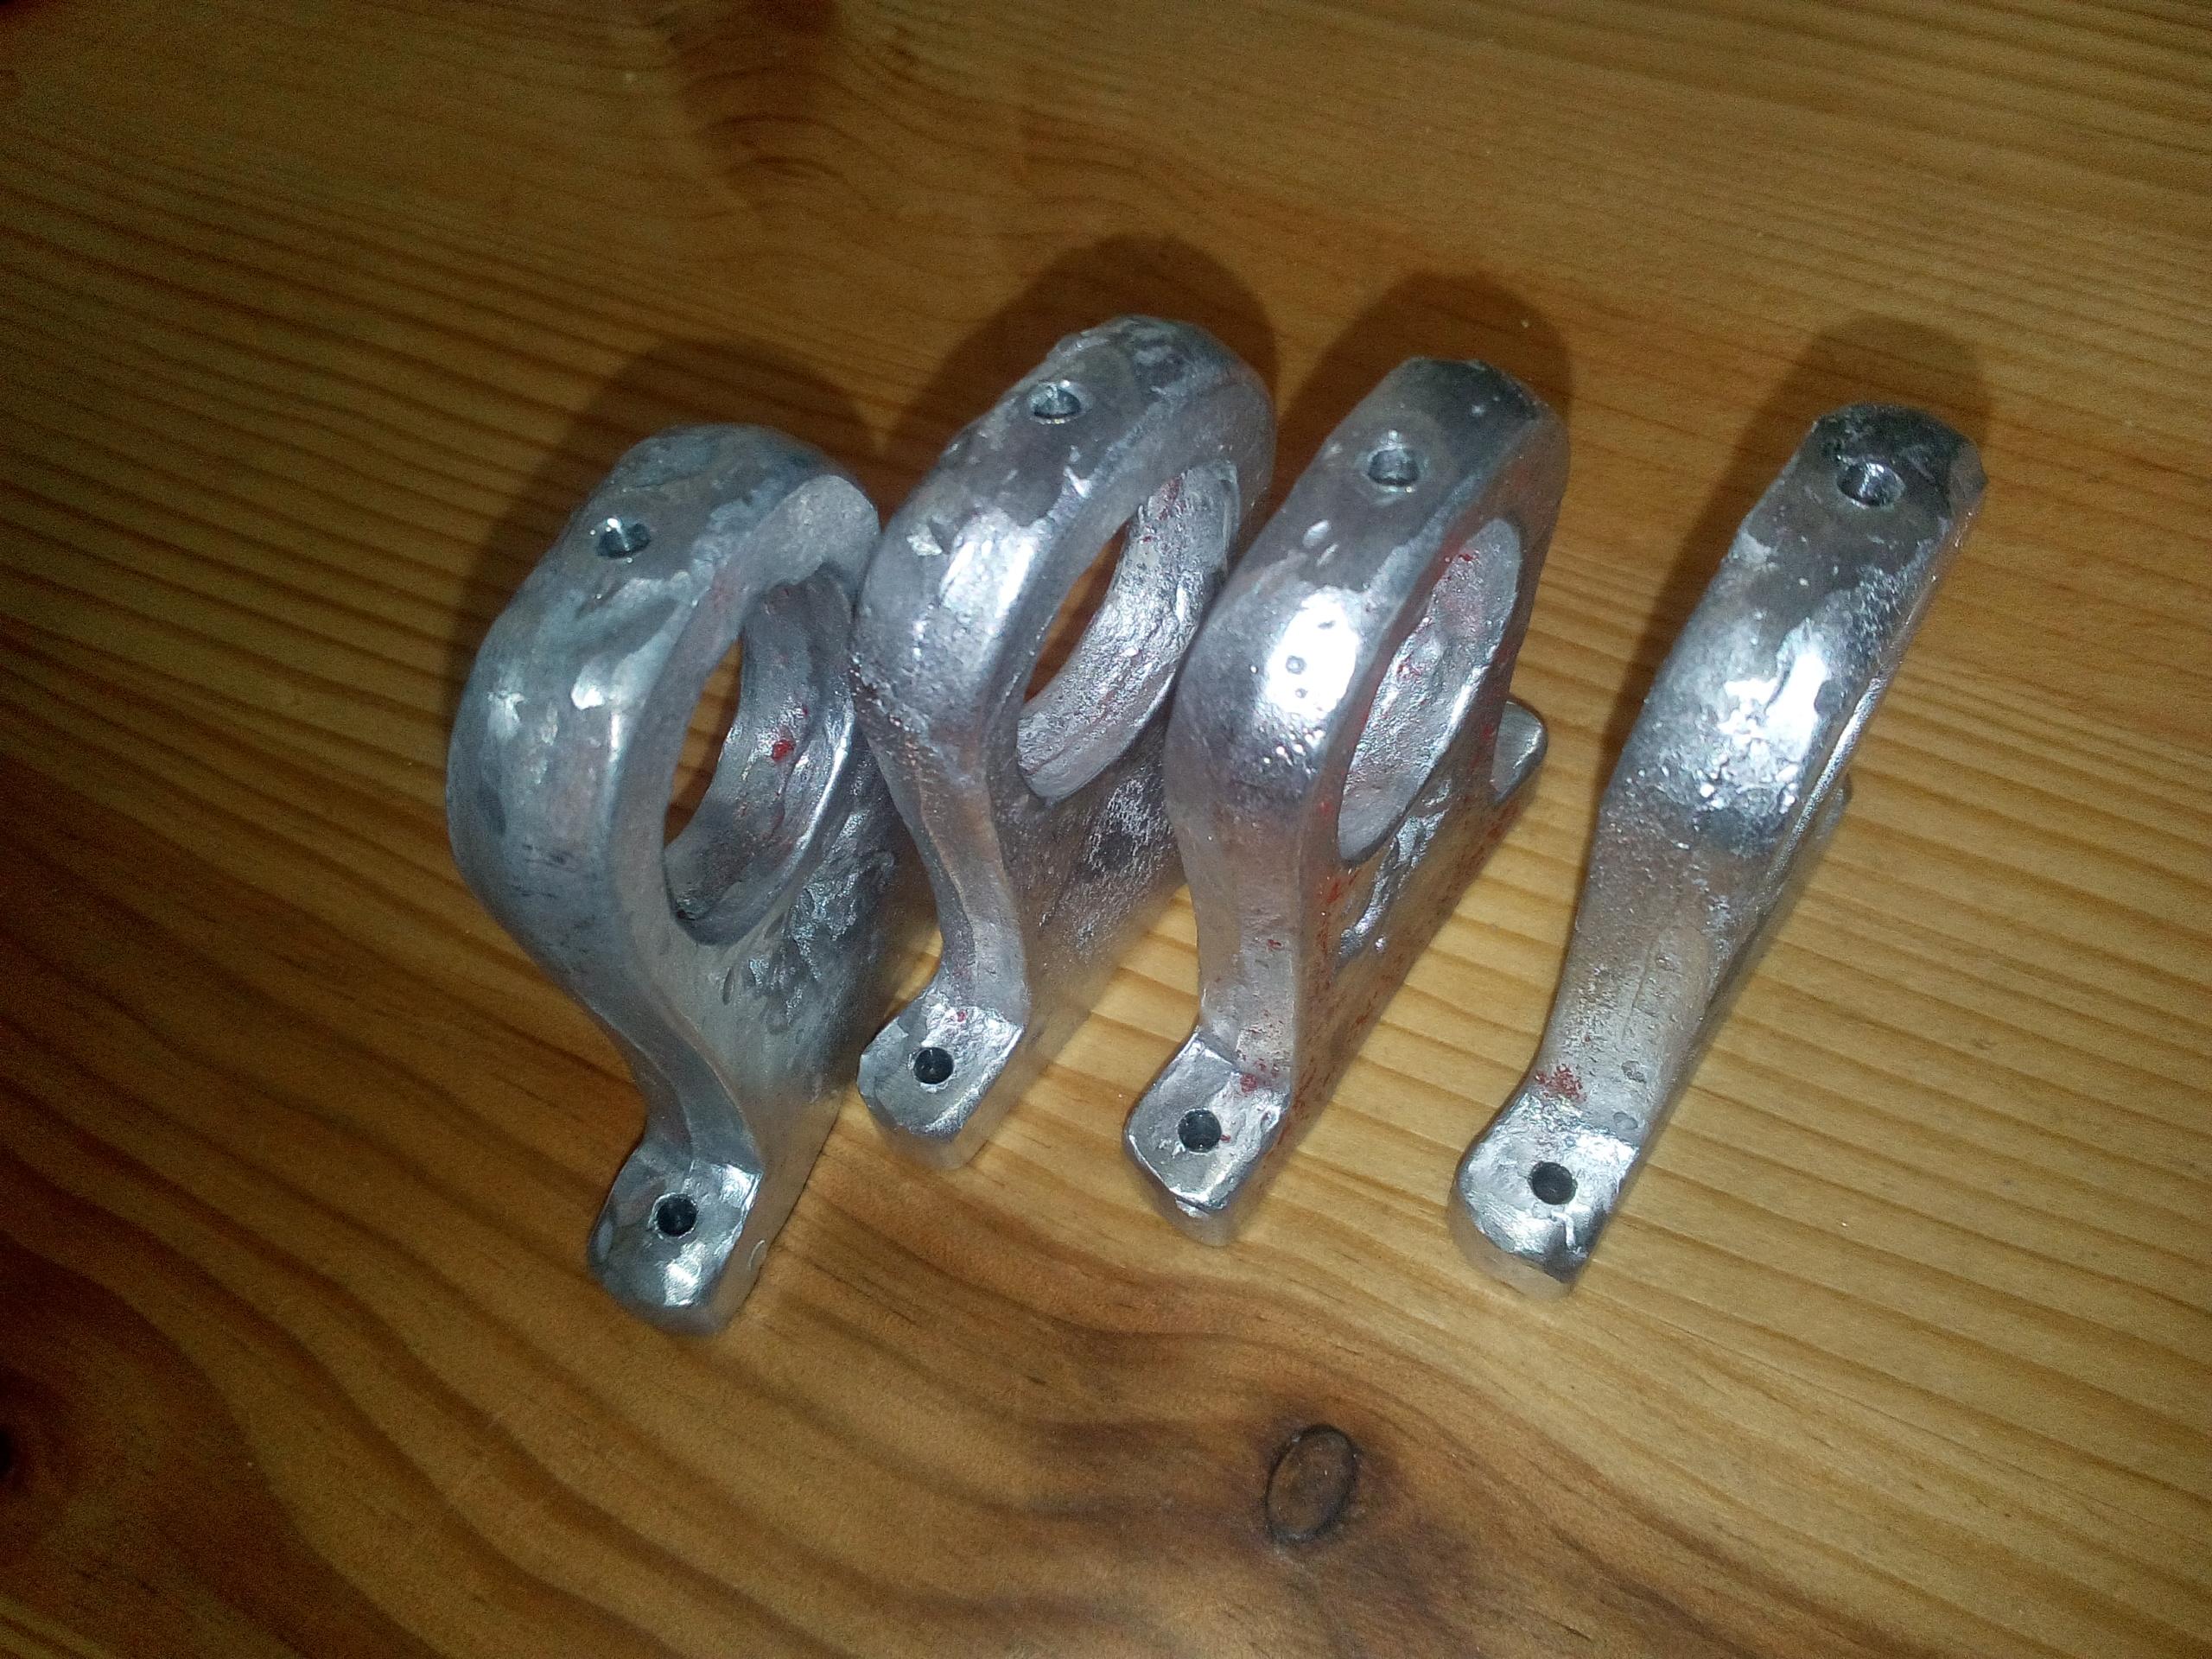 The four gimbal pieces, once polished and drilled.